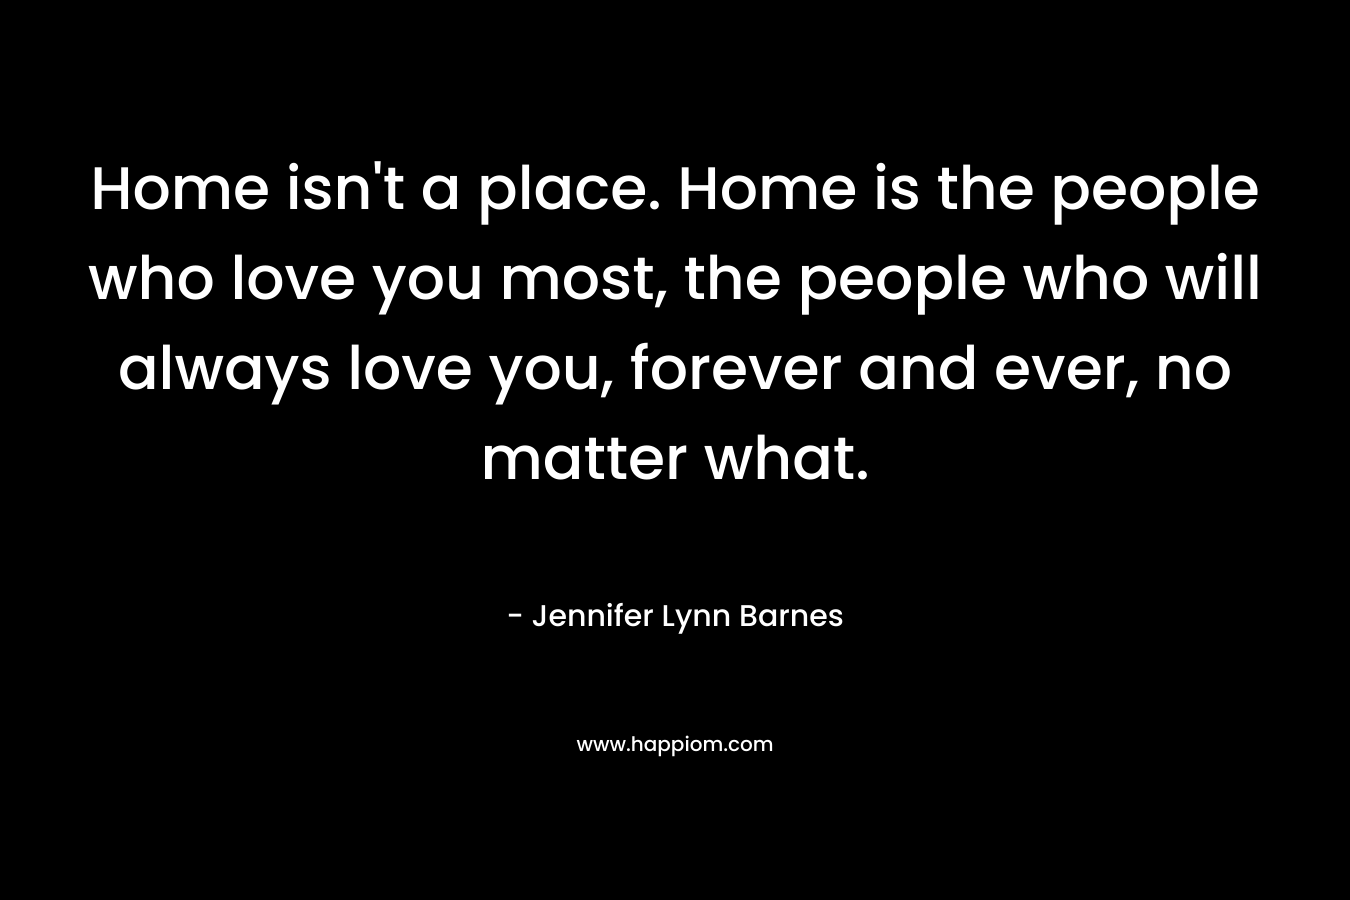 Home isn’t a place. Home is the people who love you most, the people who will always love you, forever and ever, no matter what. – Jennifer Lynn Barnes